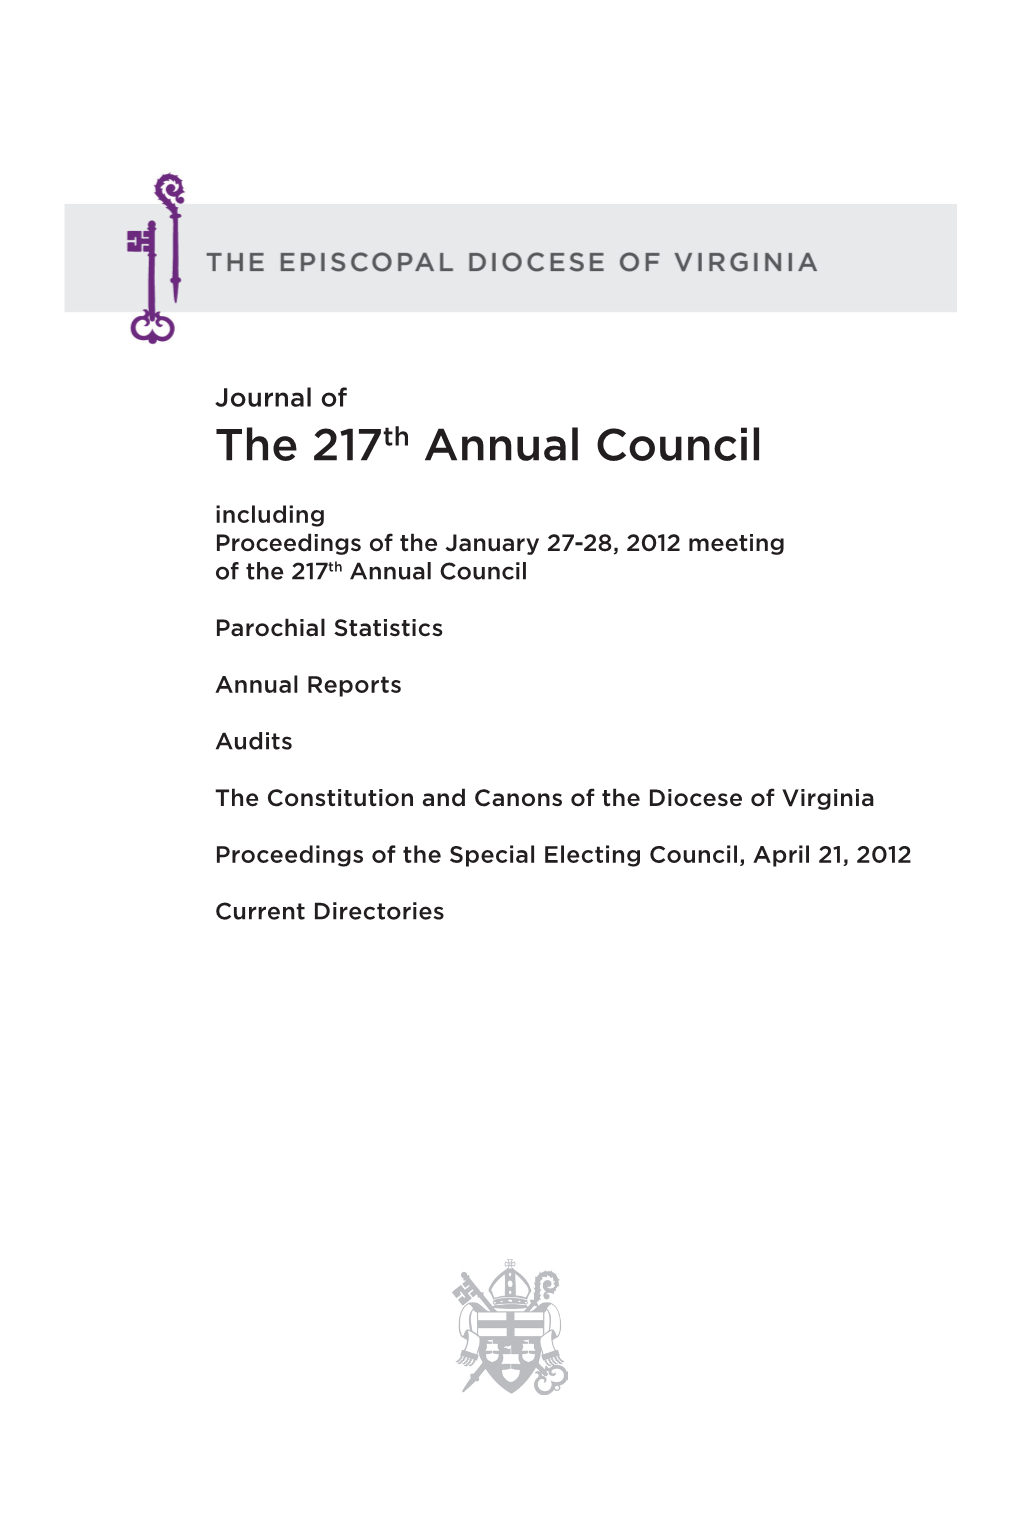 The 217Th Annual Council Including Proceedings of the January 27-28, 2012 Meeting of the 217Th Annual Council